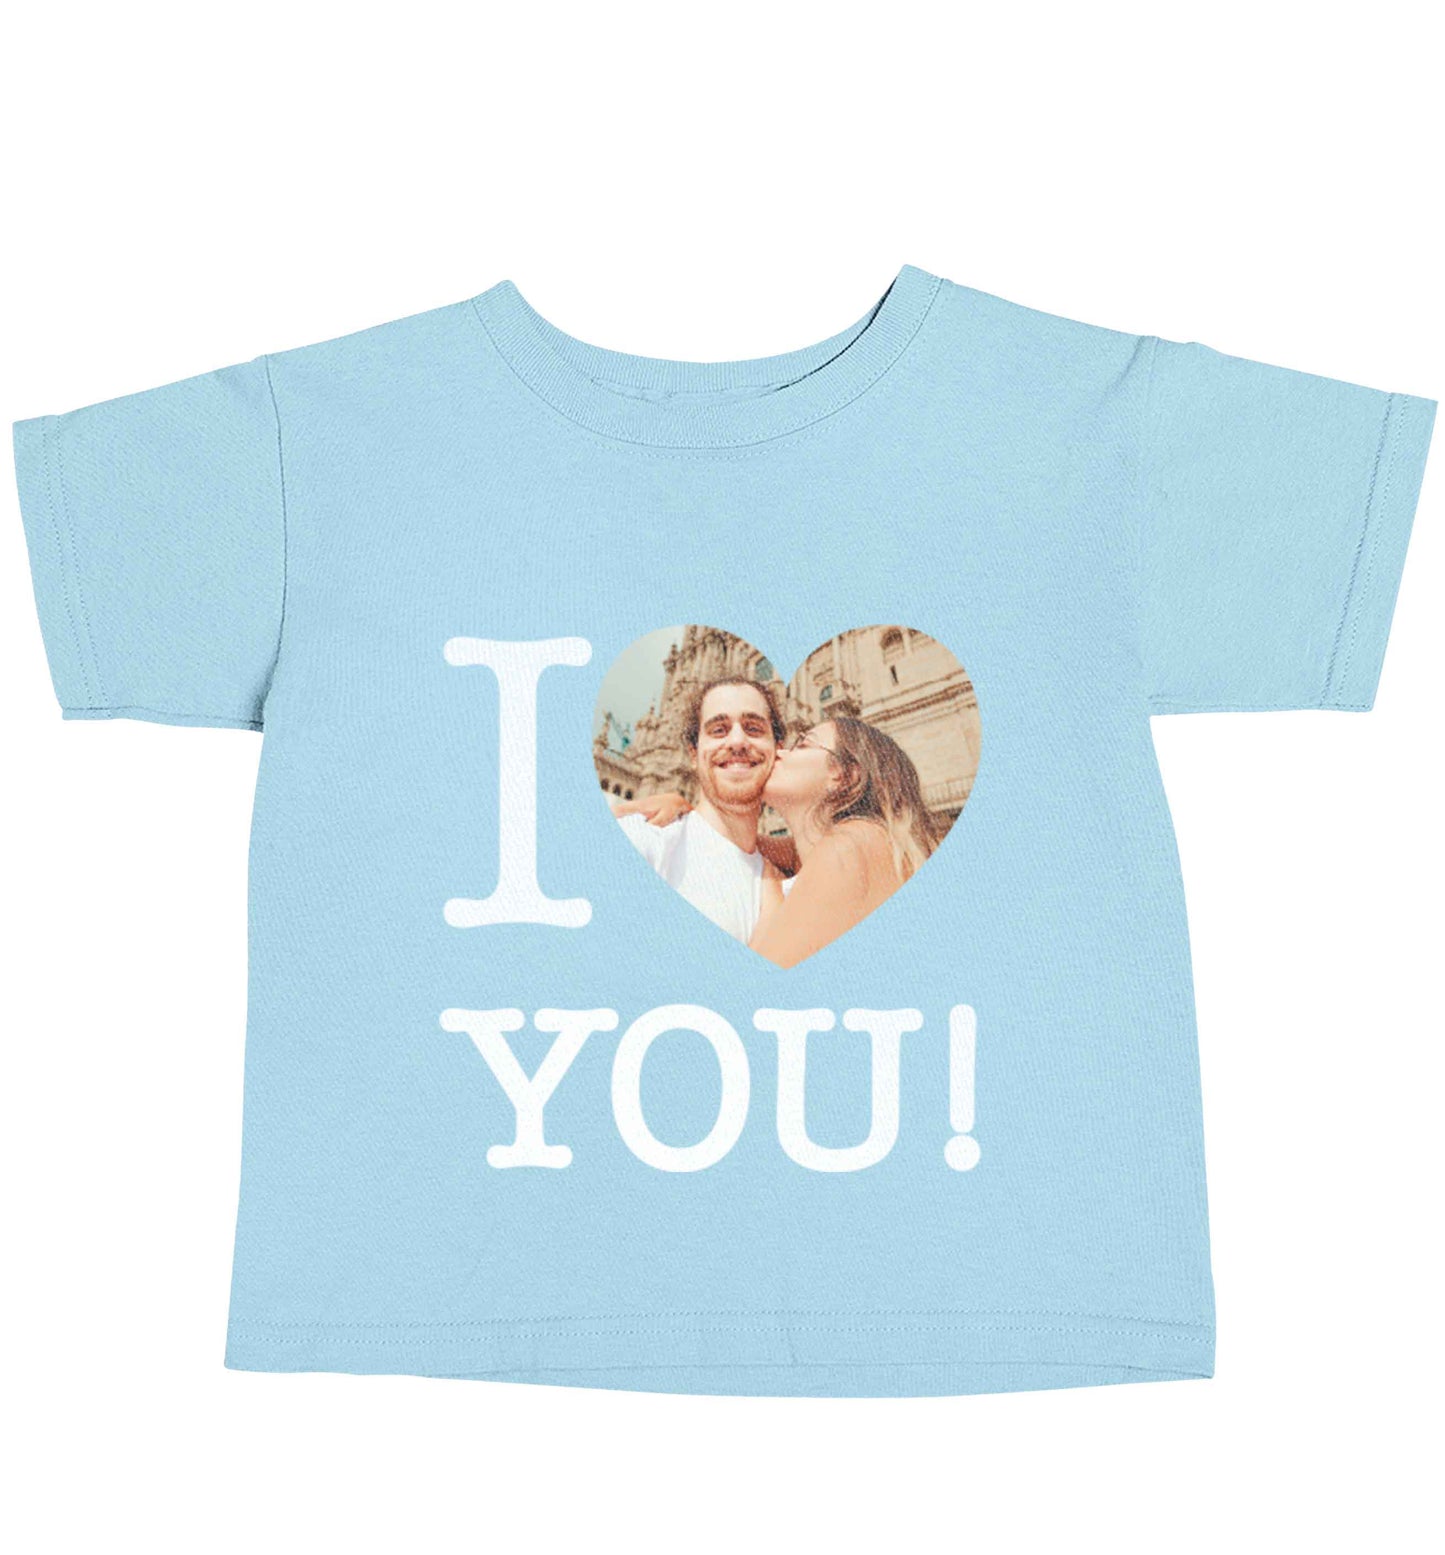 I love you light blue baby toddler Tshirt 2 Years